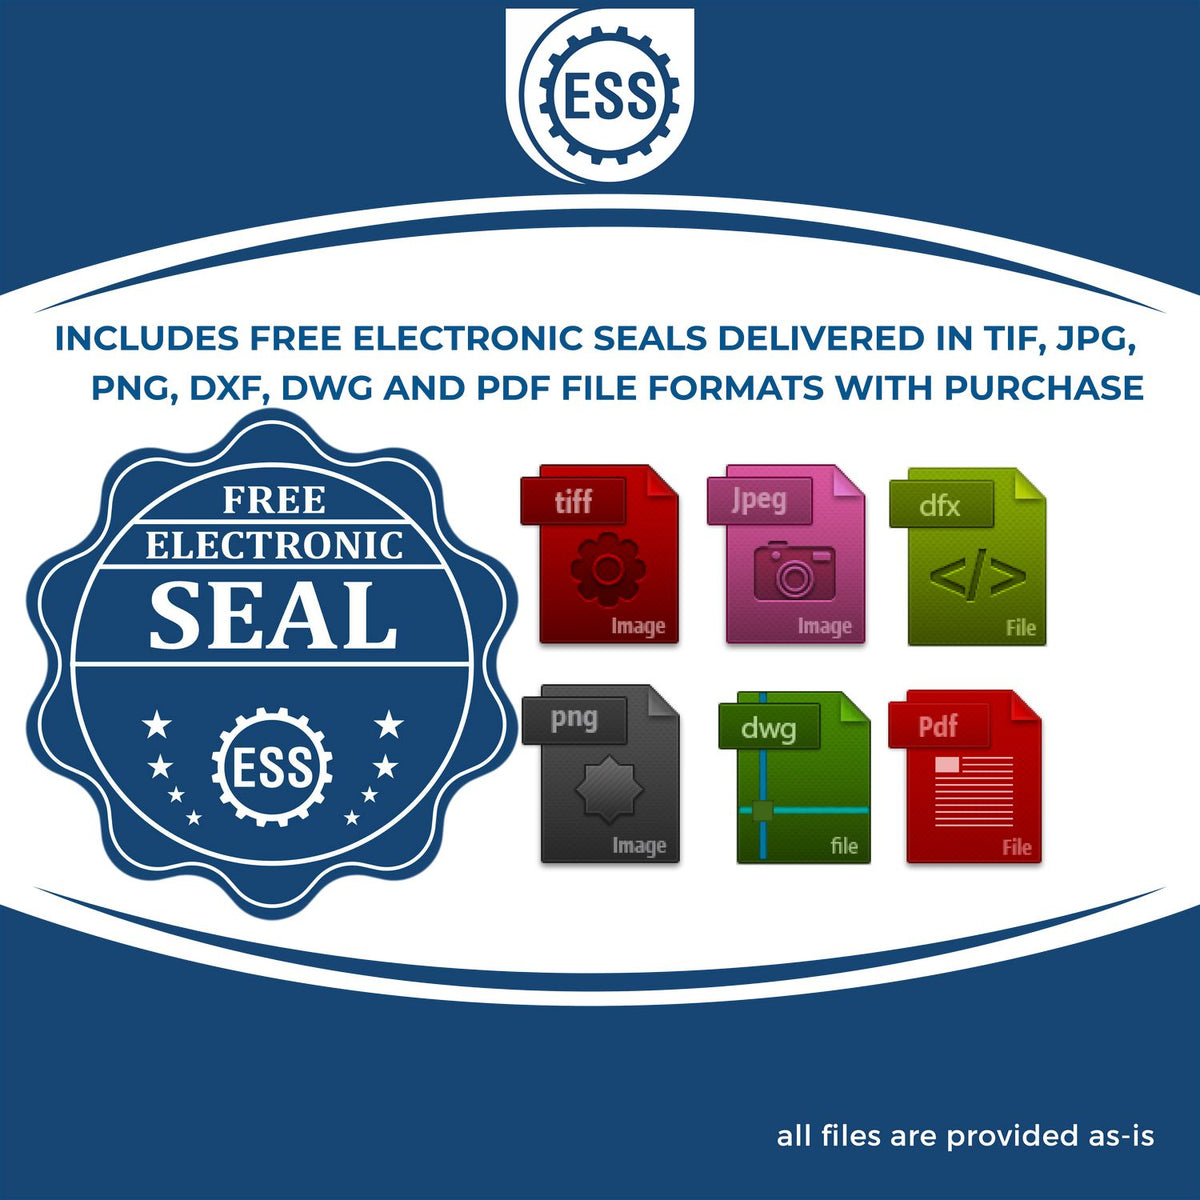 An infographic for the free electronic seal for the PSI Massachusetts Notary Stamp illustrating the different file type icons such as DXF, DWG, TIF, JPG and PNG.